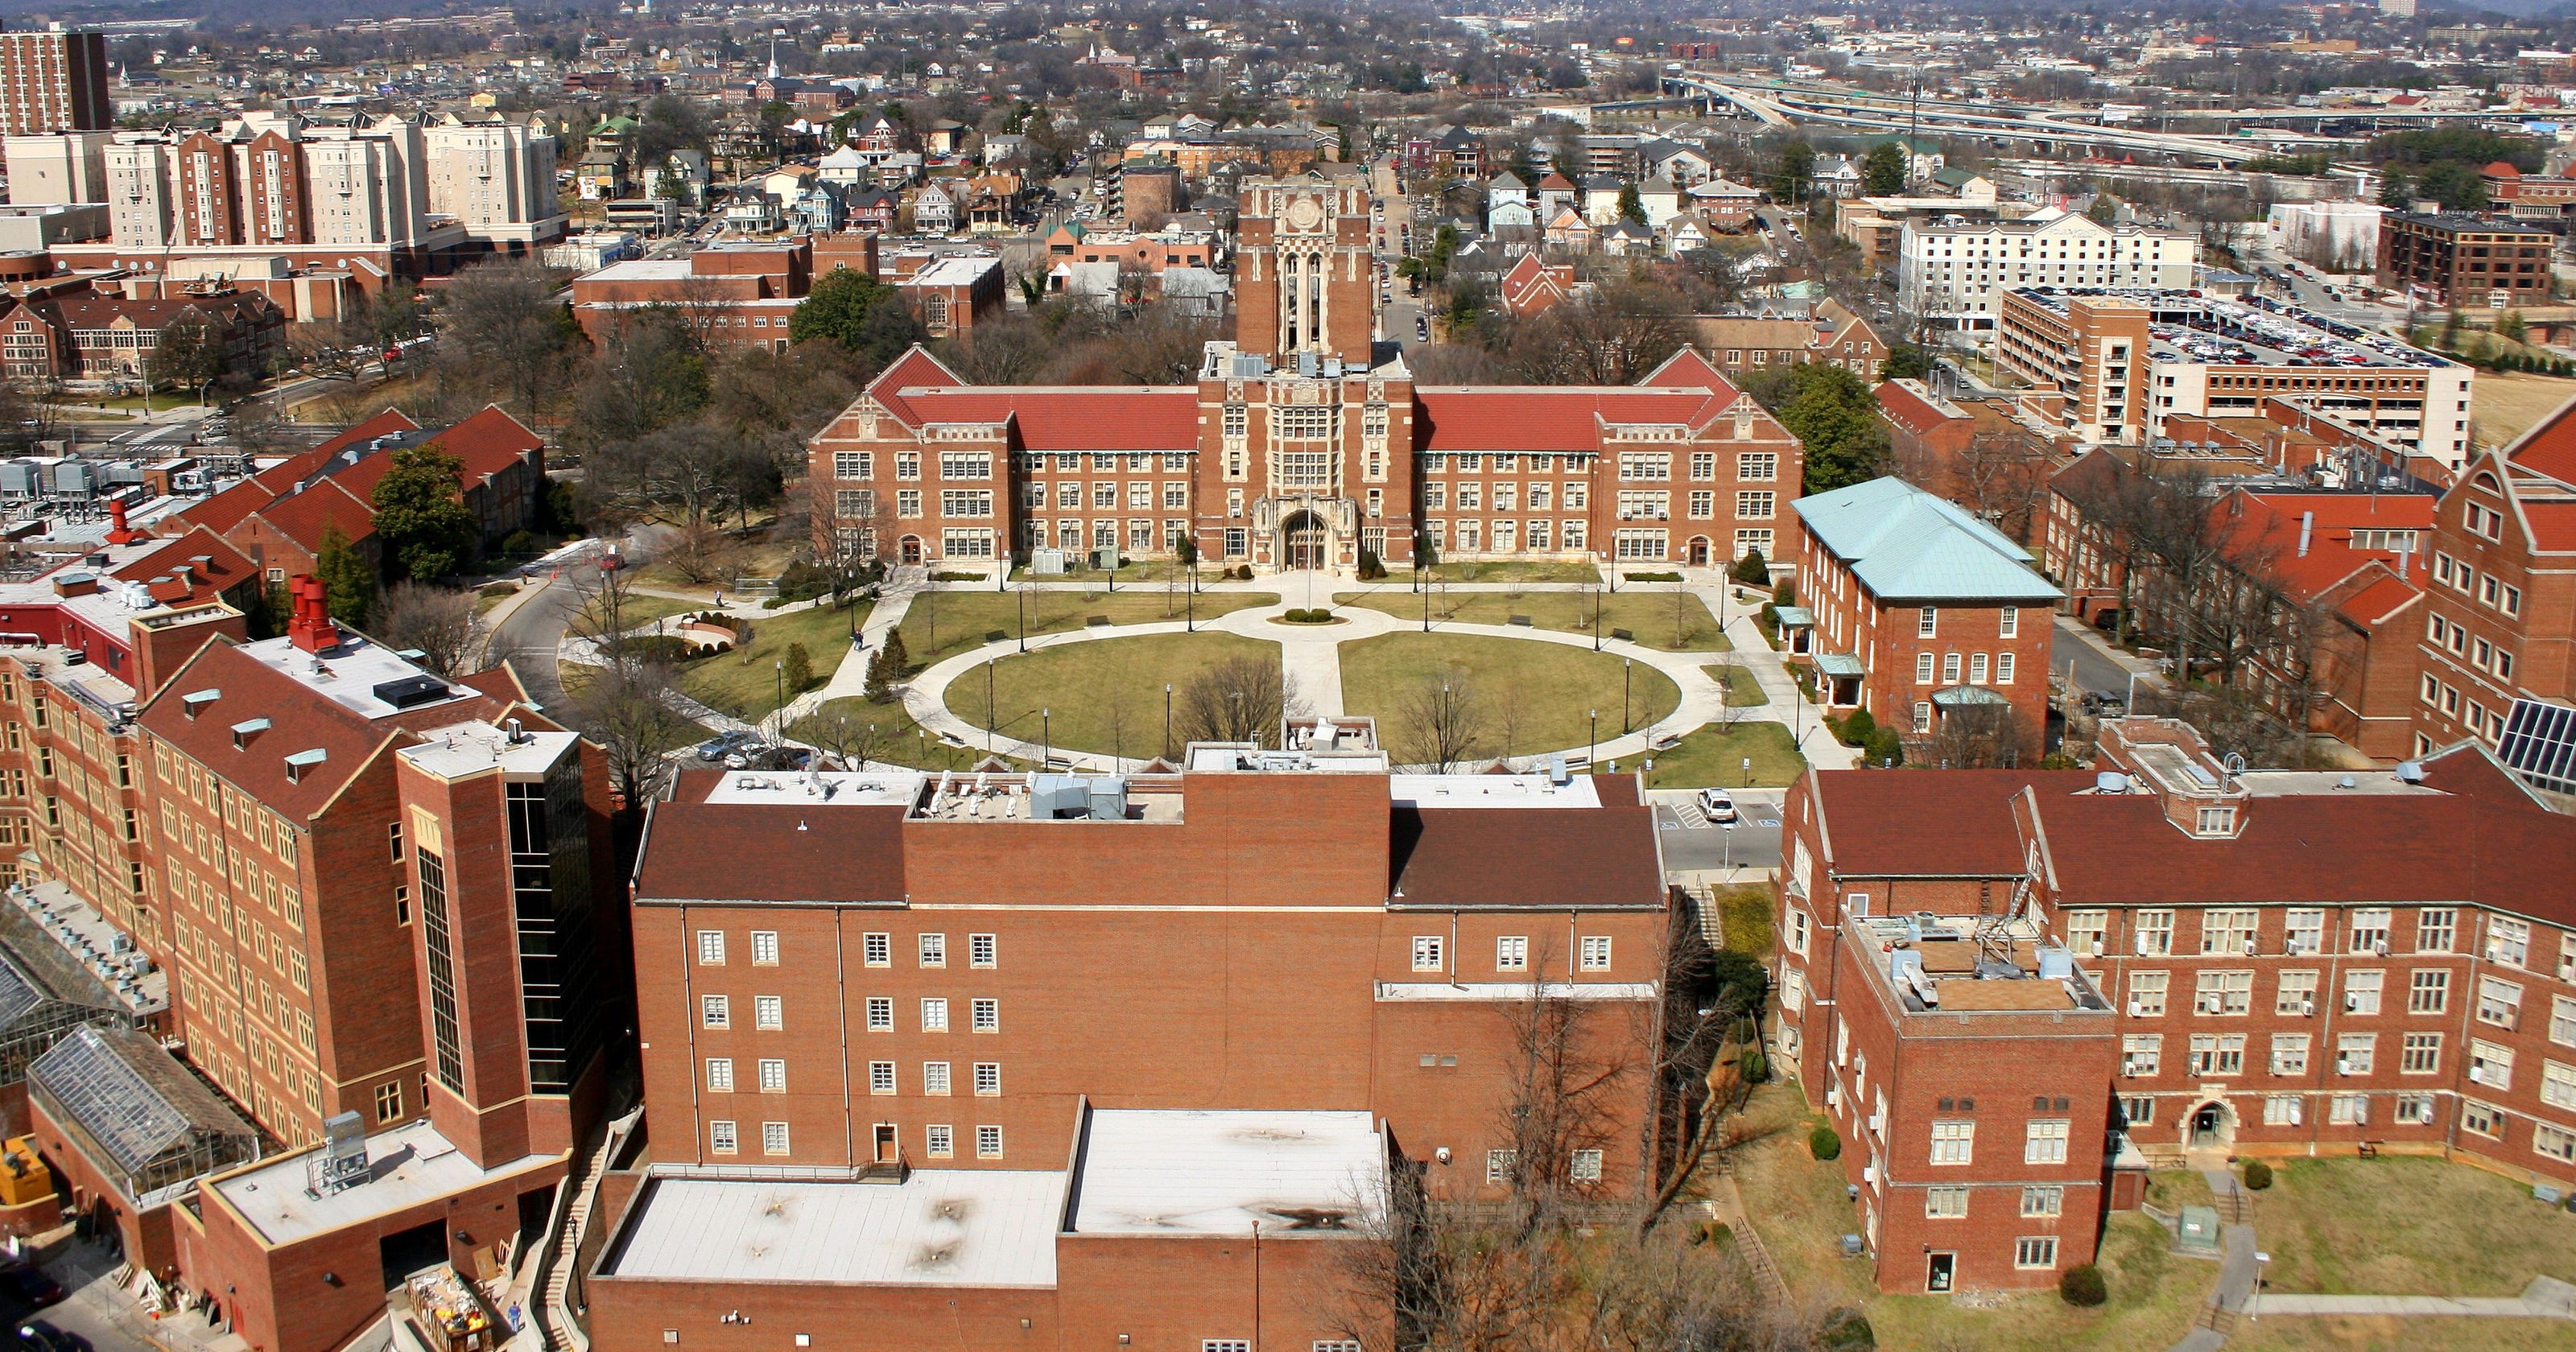 University of Tennessee in United States of America - Ranking and